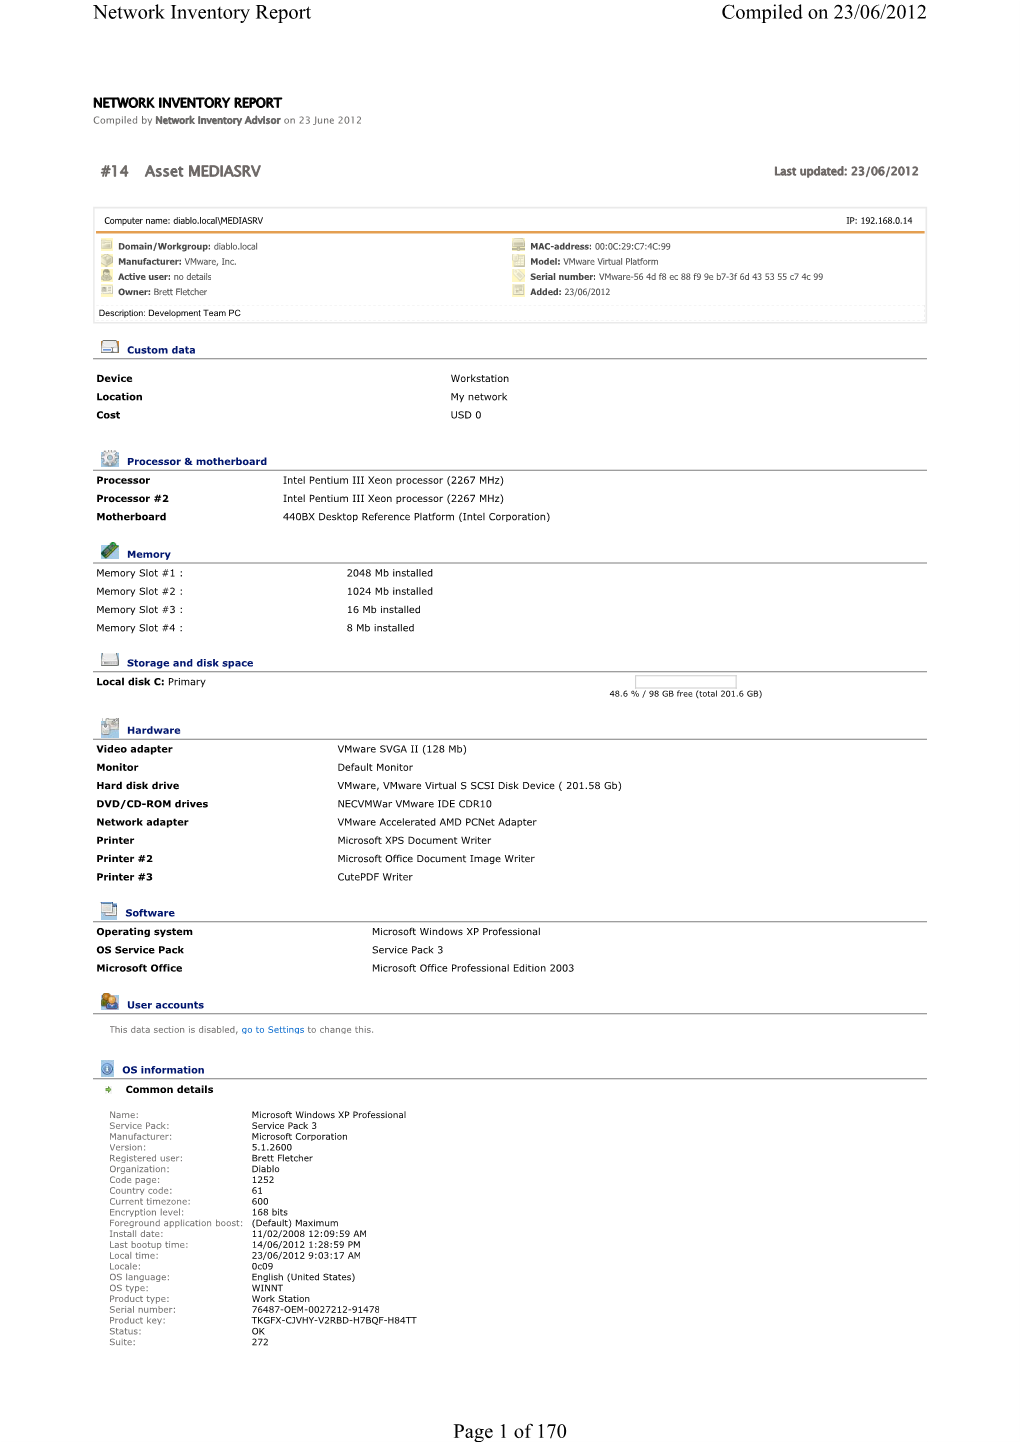 Compiled on 23/06/2012 Network Inventory Report Page 1 Of